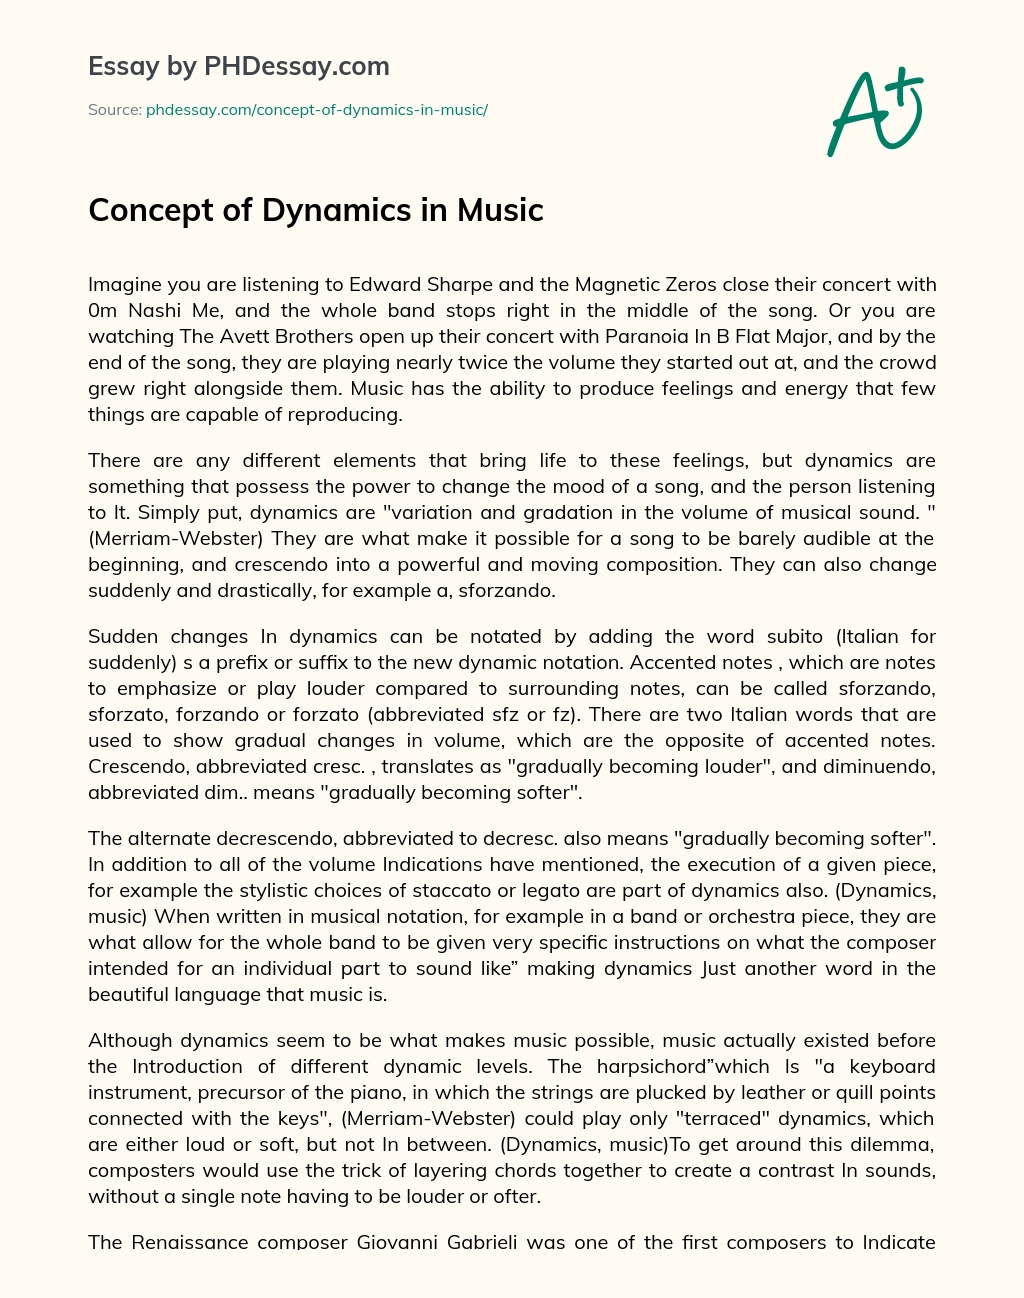 Concept of Dynamics in Music essay